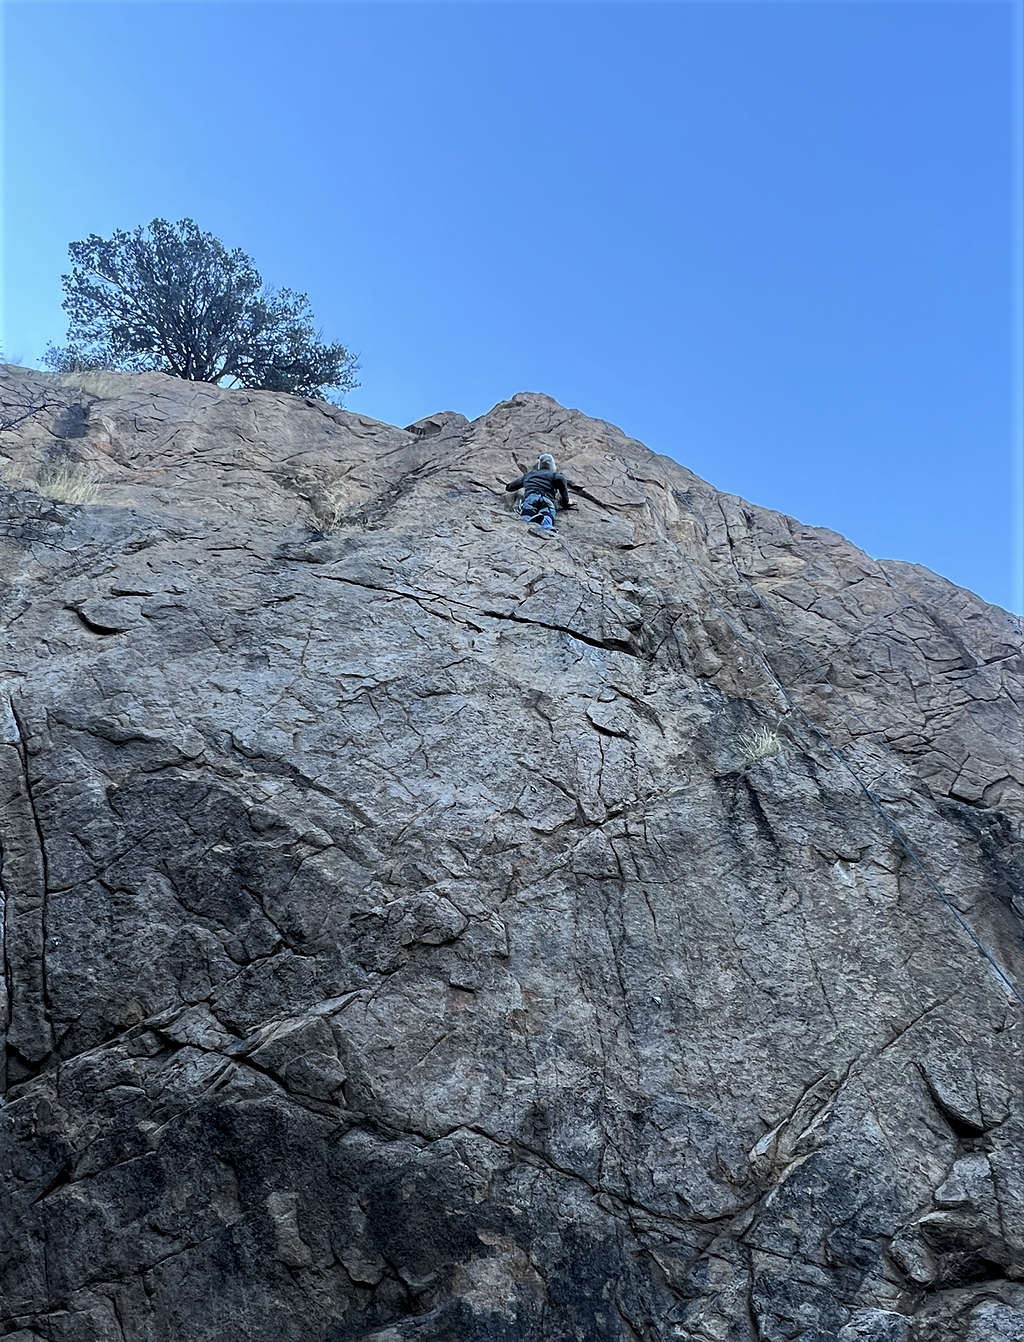 Dow soloing Jacob's Ladder, 5.8